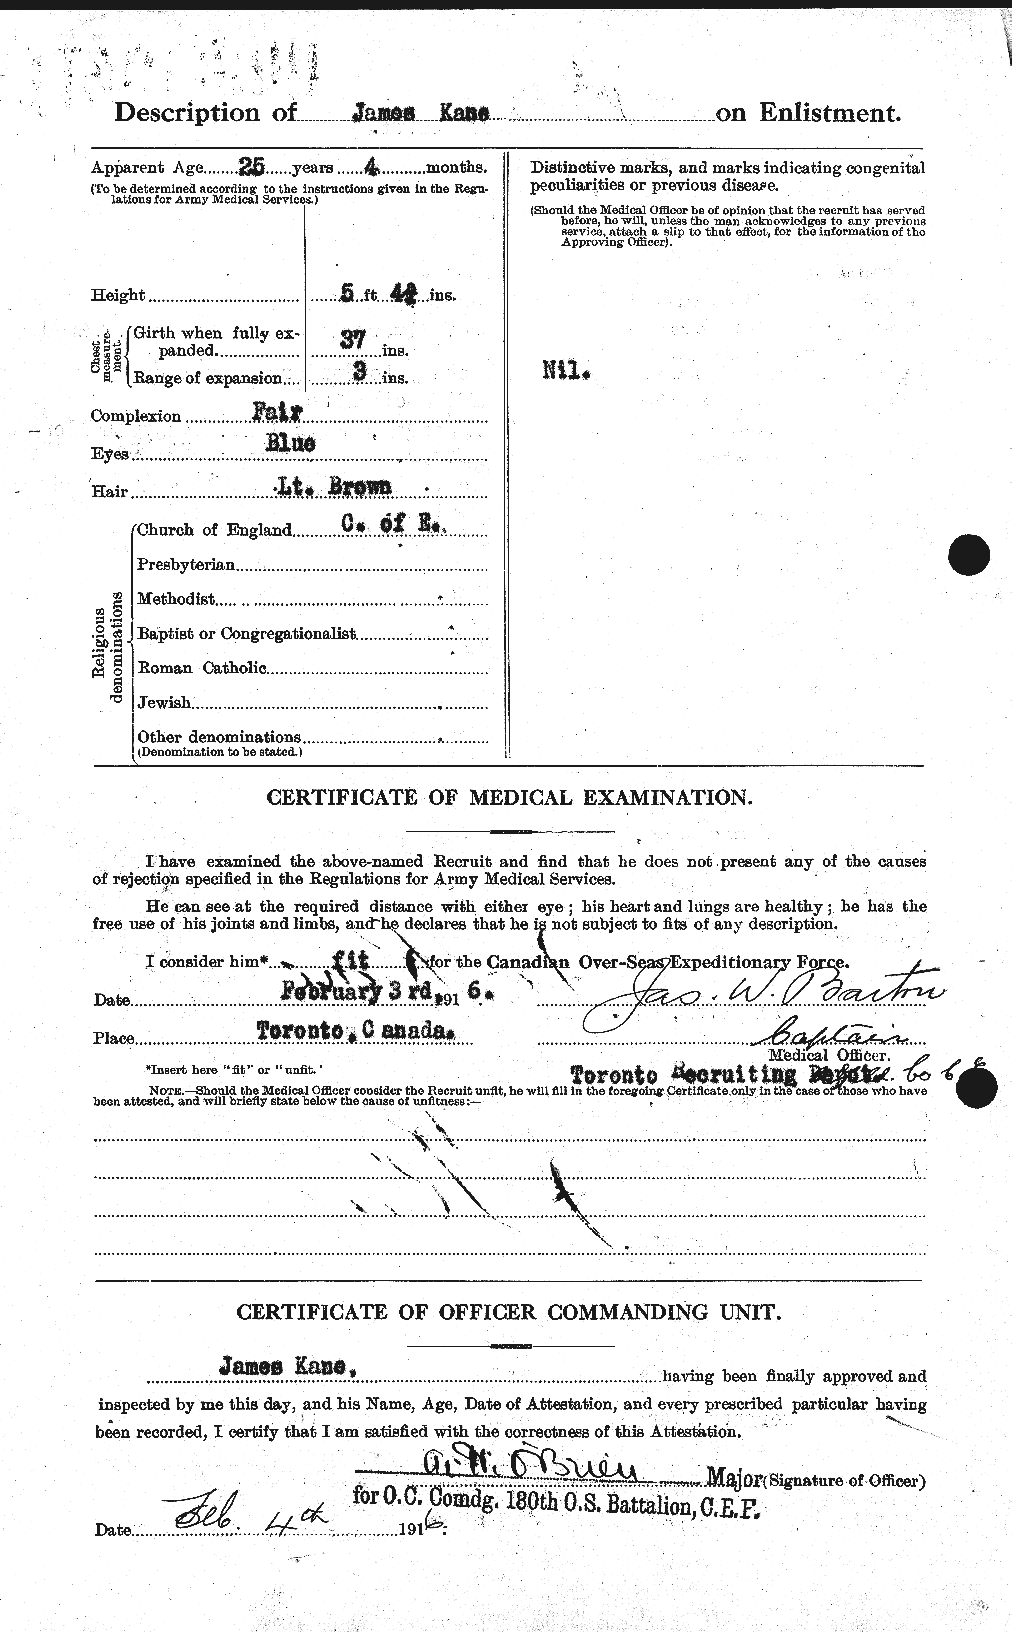 Personnel Records of the First World War - CEF 431570b